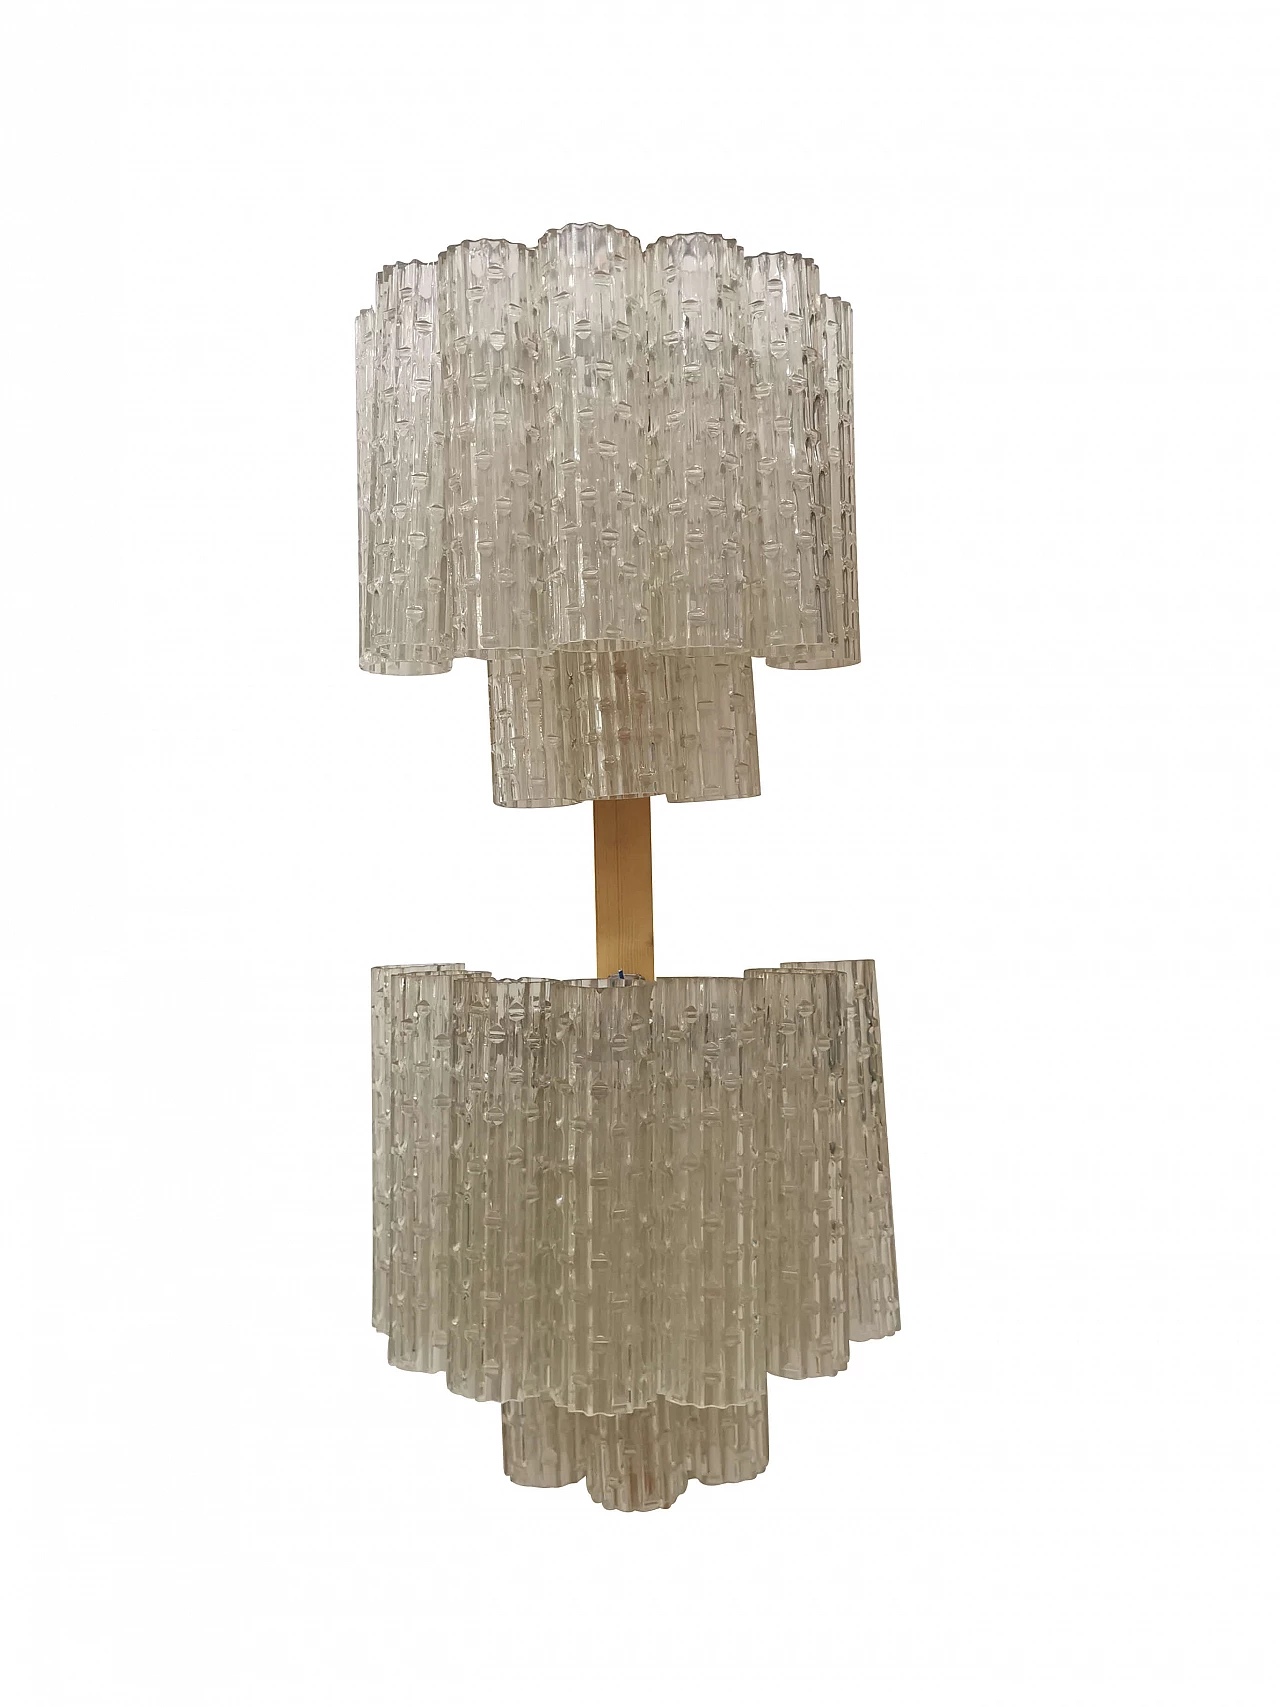 Pair of glass wall lamps by Toni Zuccheri for Venini 1185483